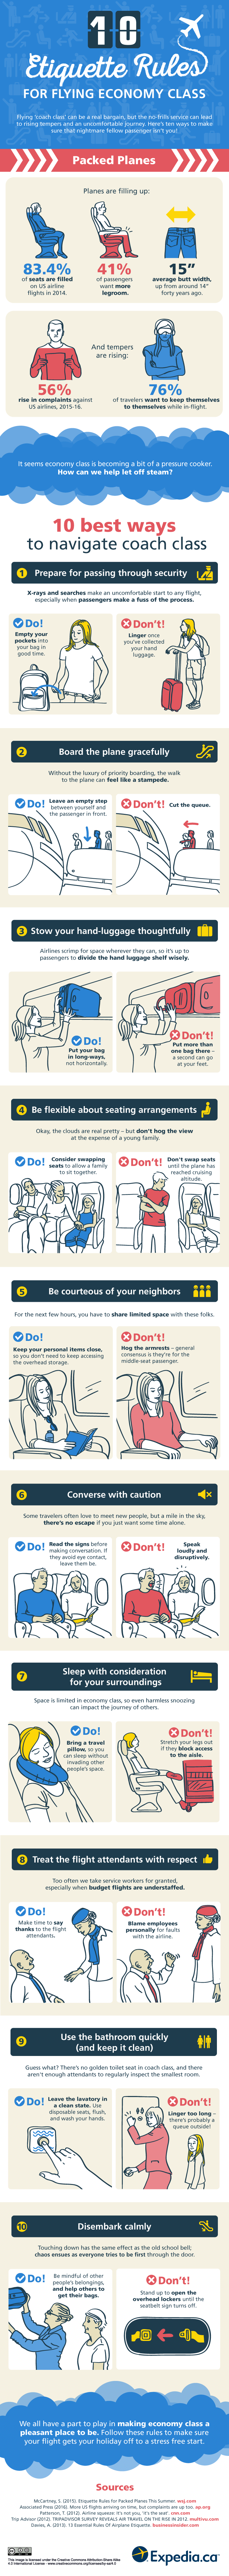 10 Etiquette Rules for Flying Economy Class [Infographic]